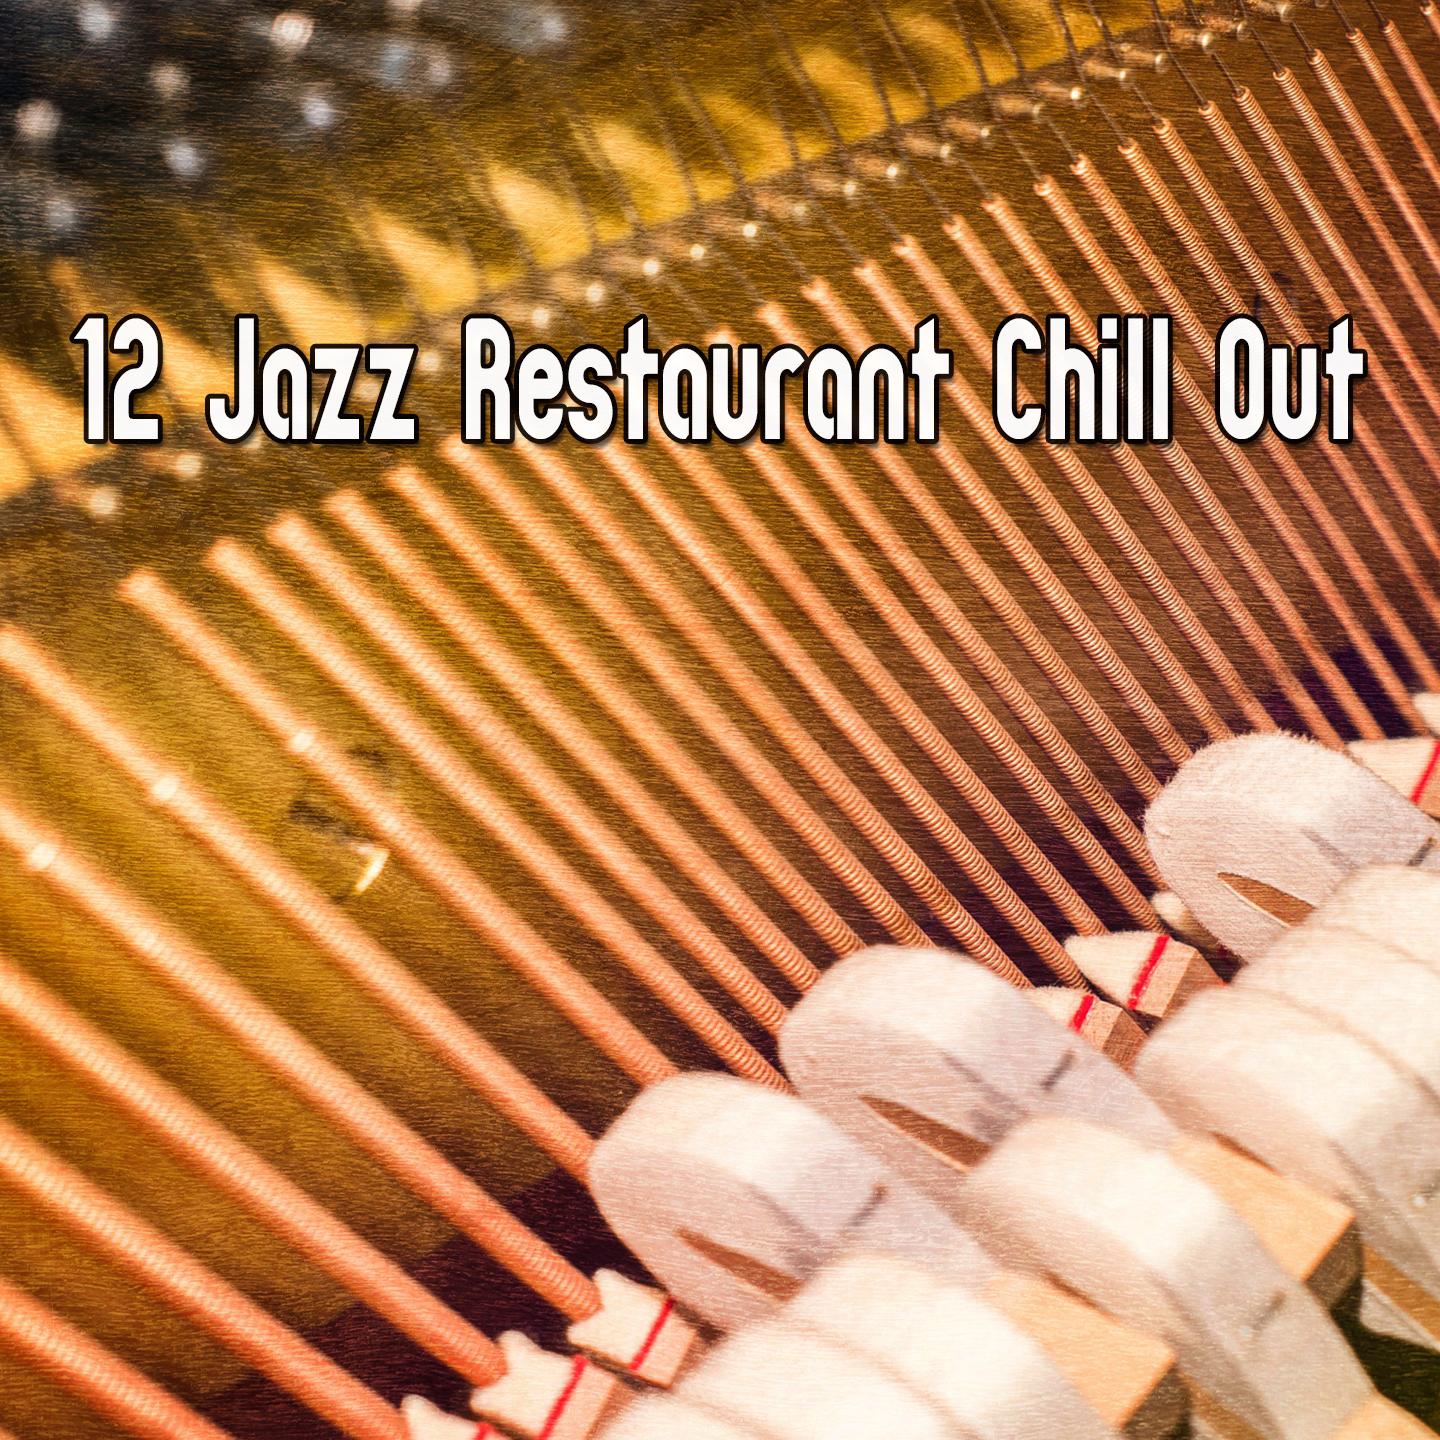 12 Jazz Restaurant Chill Out